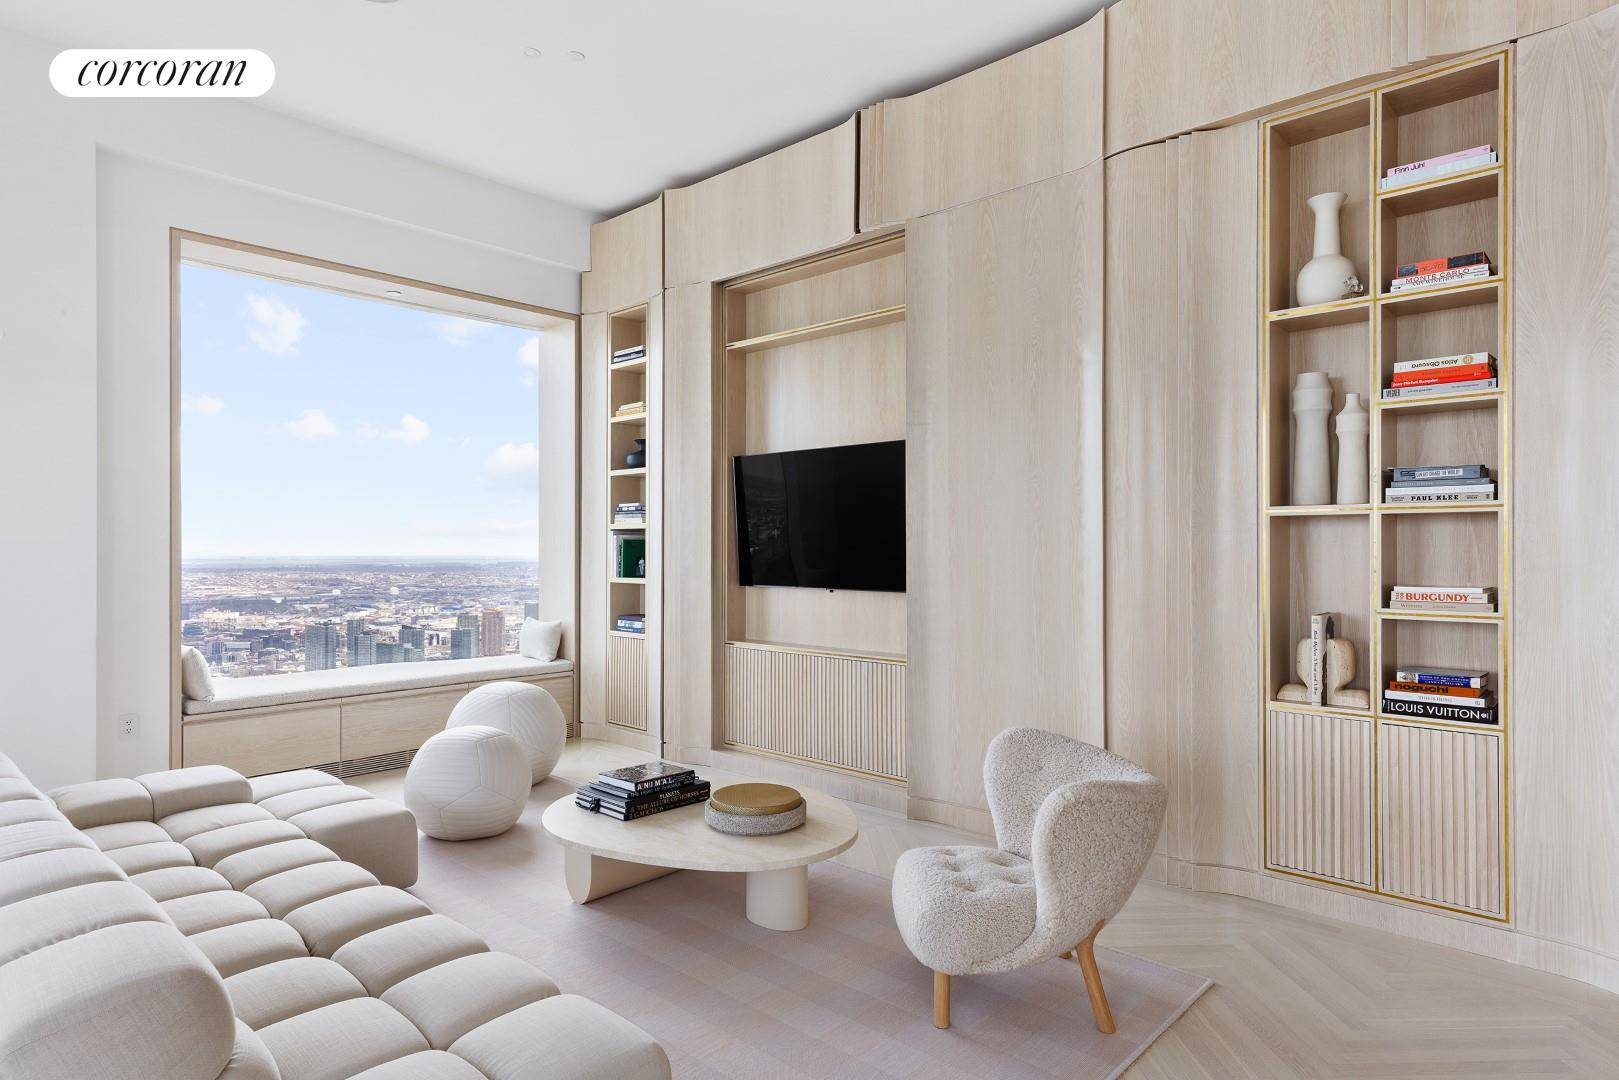 Residence 66A at 432 Park Avenue Three Bedrooms Three Baths Library Powder Room 4, 019 sqft Designed by Diana Rice y Chelsea Reale of NYC based design studio Sissy Marley ...